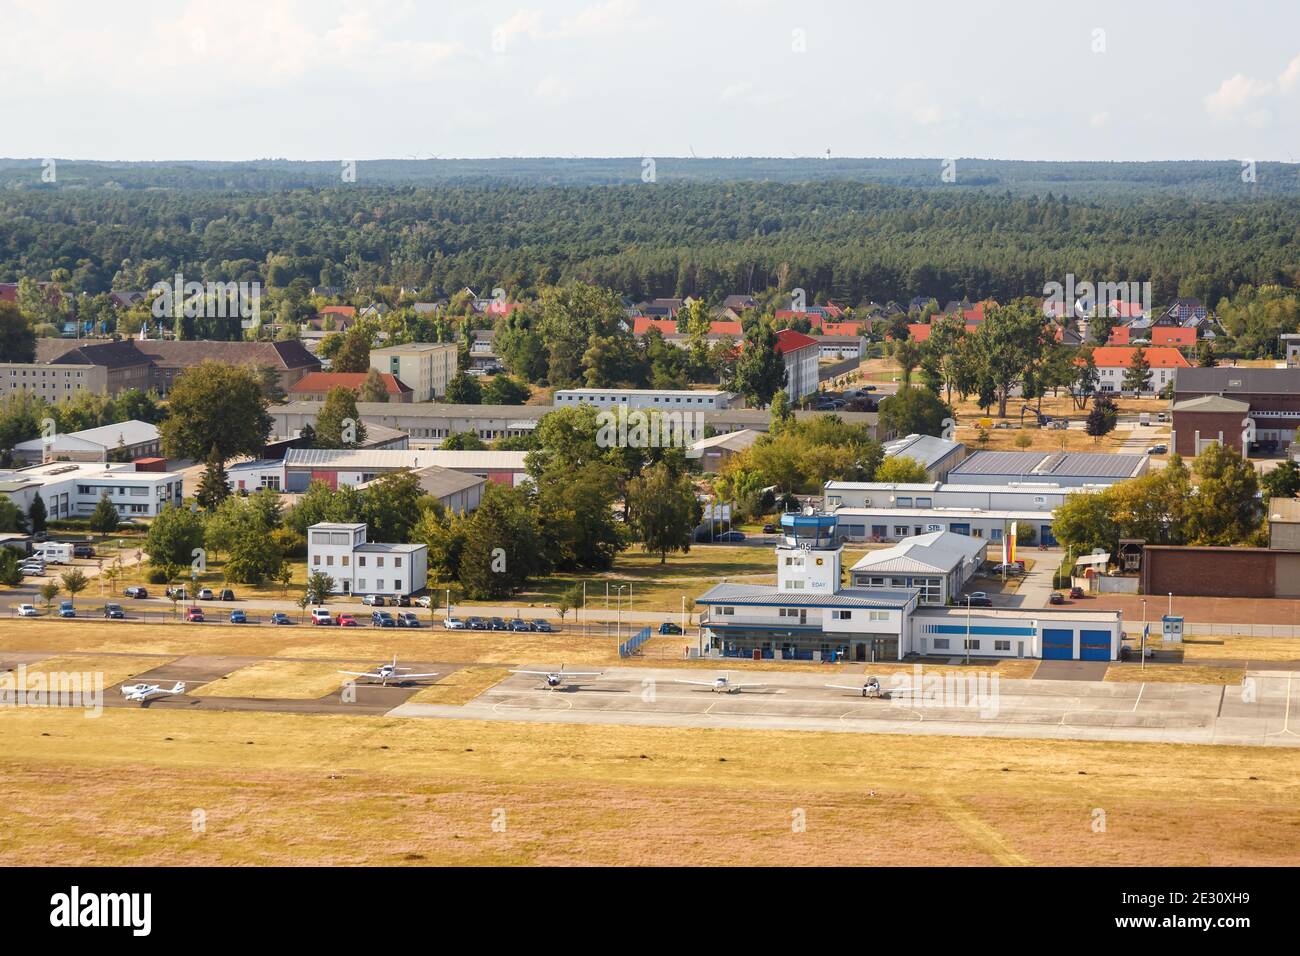 Strausberg, Germany - August 19, 2020: Strausberg Airport Terminal and Tower aerial view in Germany. Stock Photo